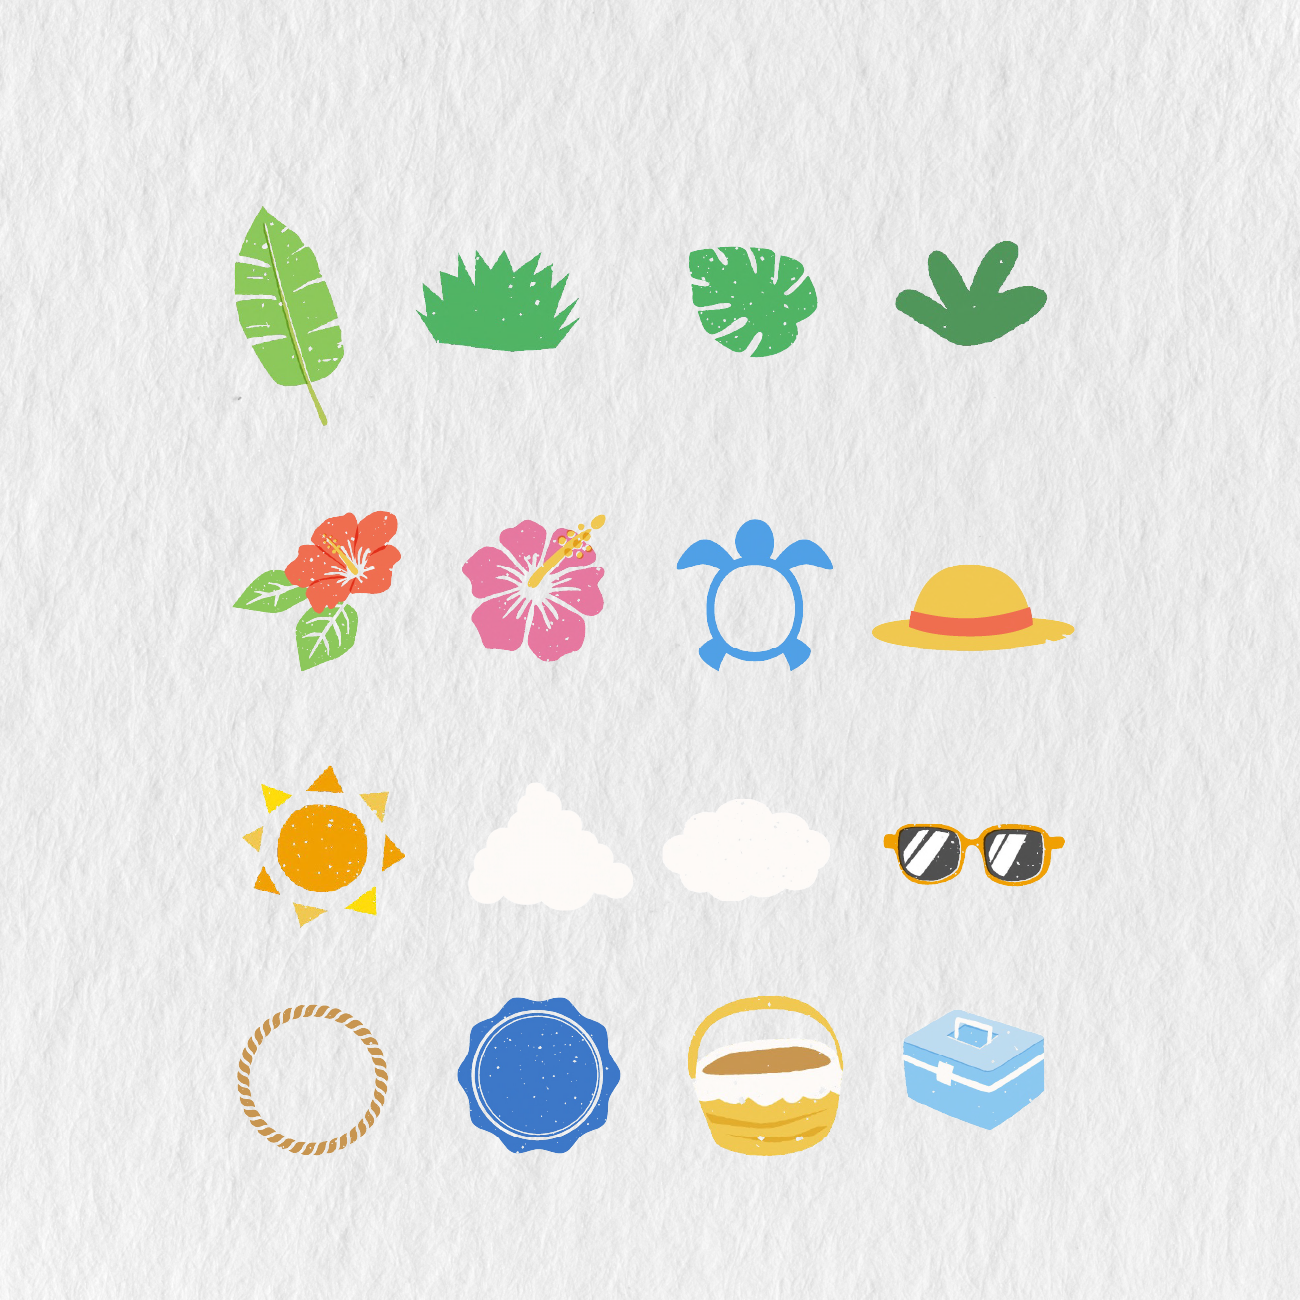 Heart Aesthetic Summer Deco Sticker — Stationery Pal